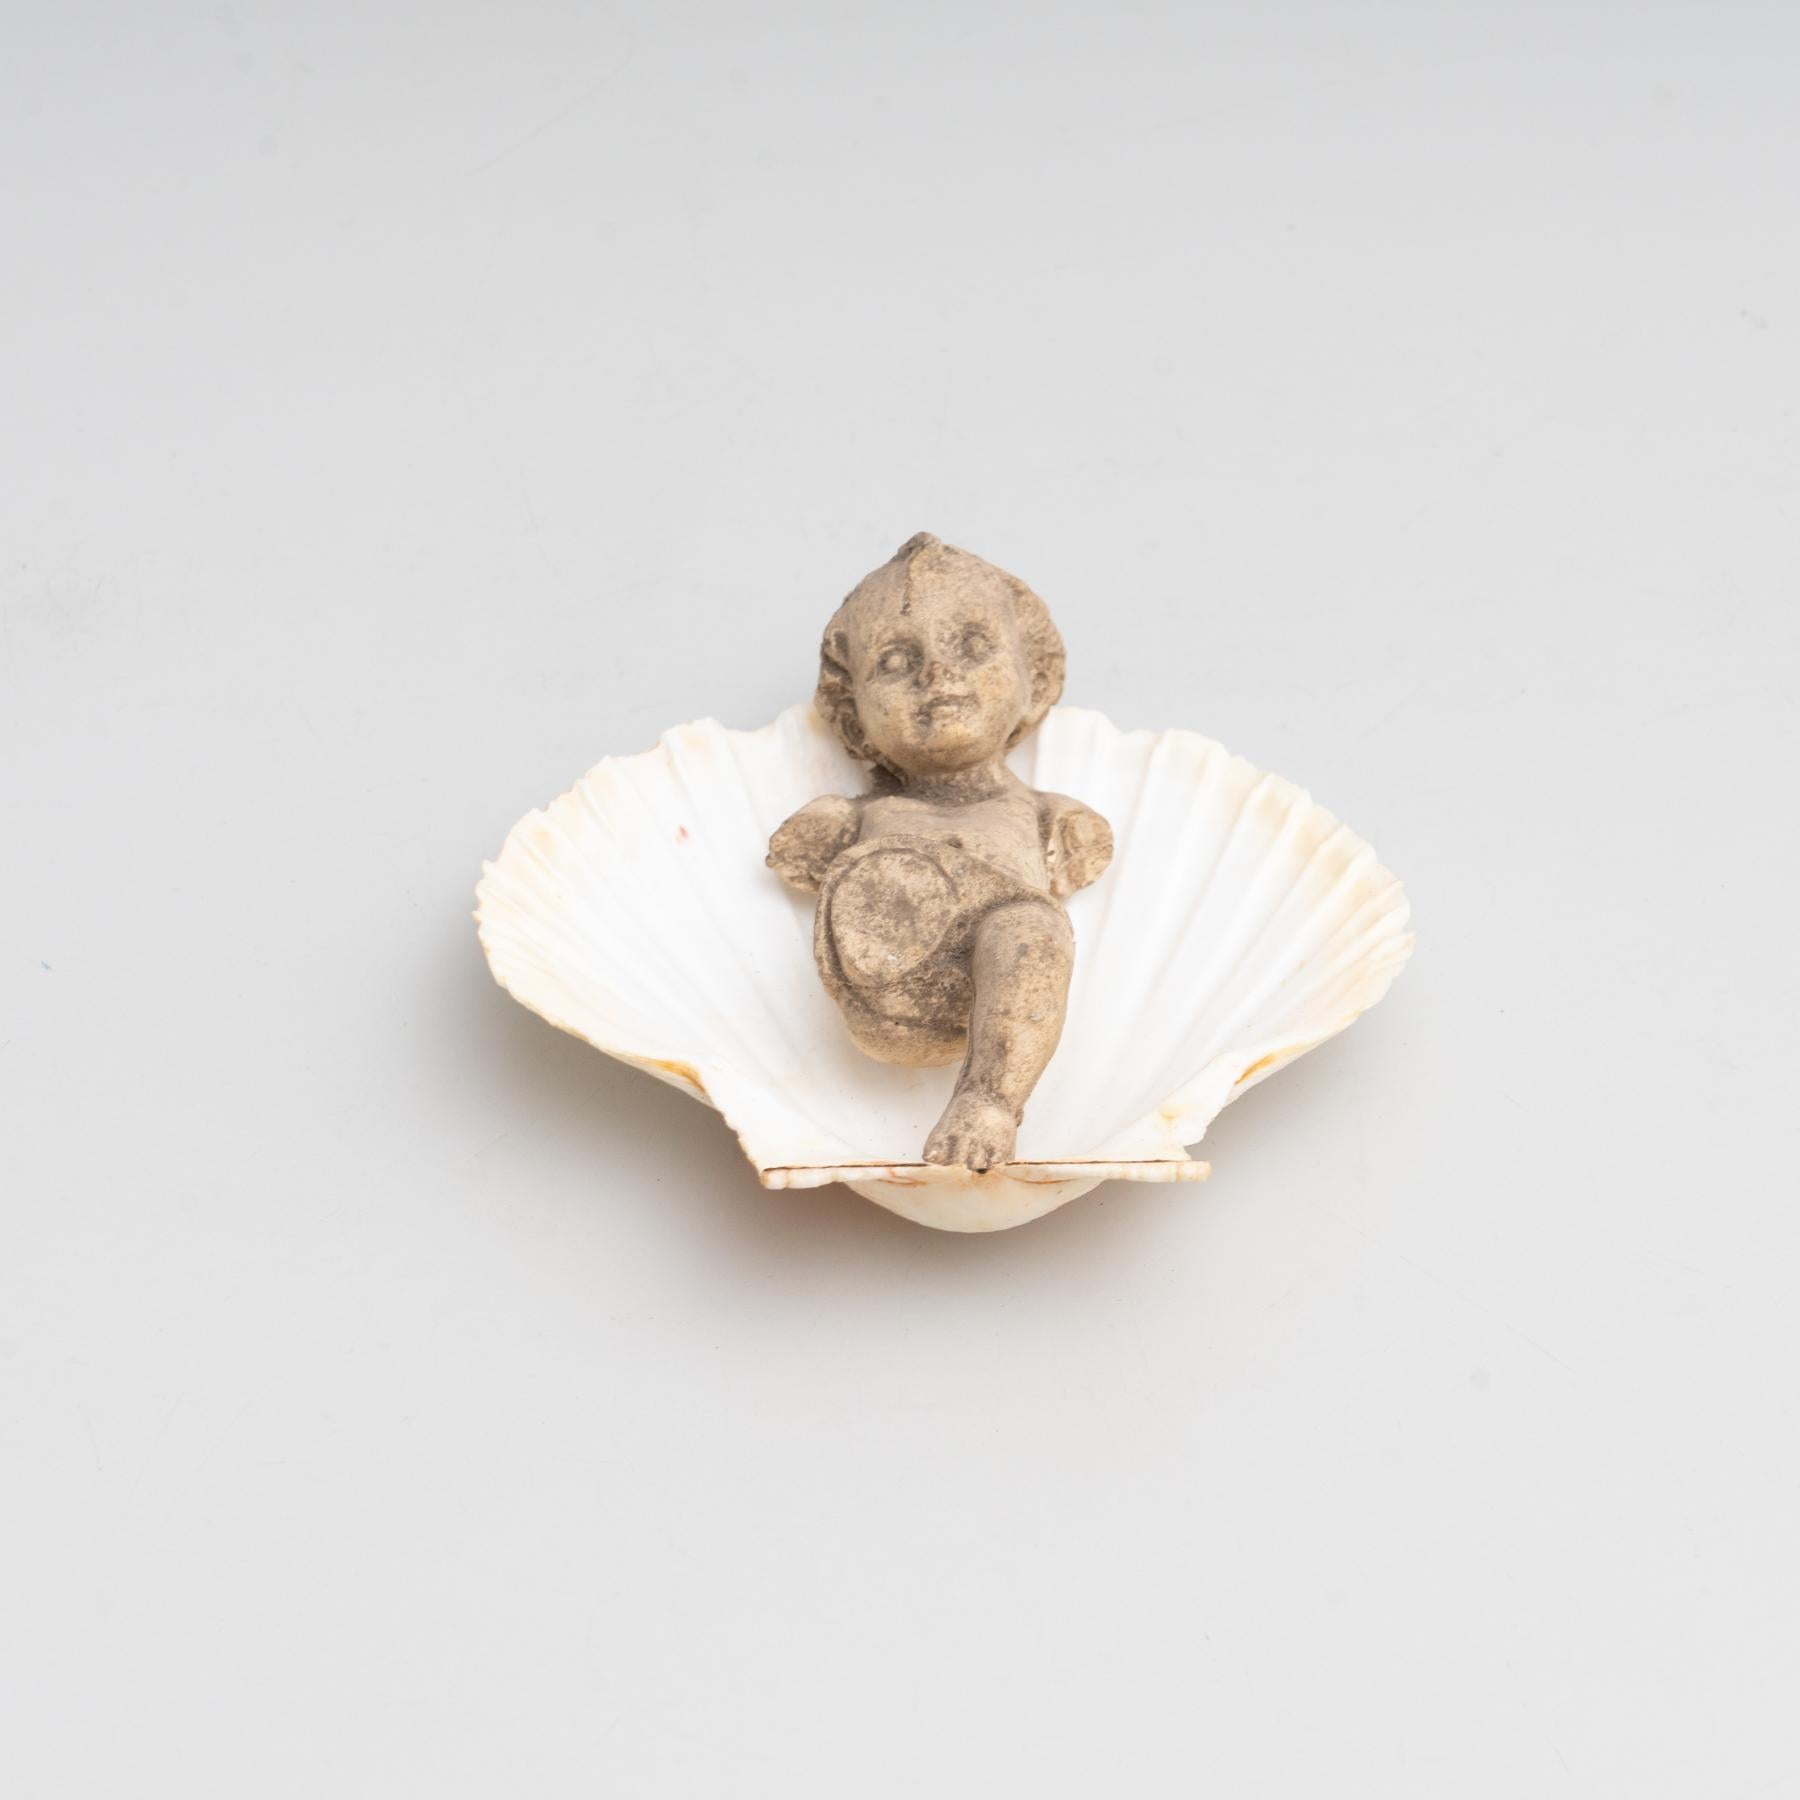 Cabinet of curiosities of plaster baby Jesus on a shell stand.

Made in traditional Catalan atelier in Olot, Spain, circa 1950.

Olot has a long tradition in the production of sculptures and religious imagery. The art and industry of religious